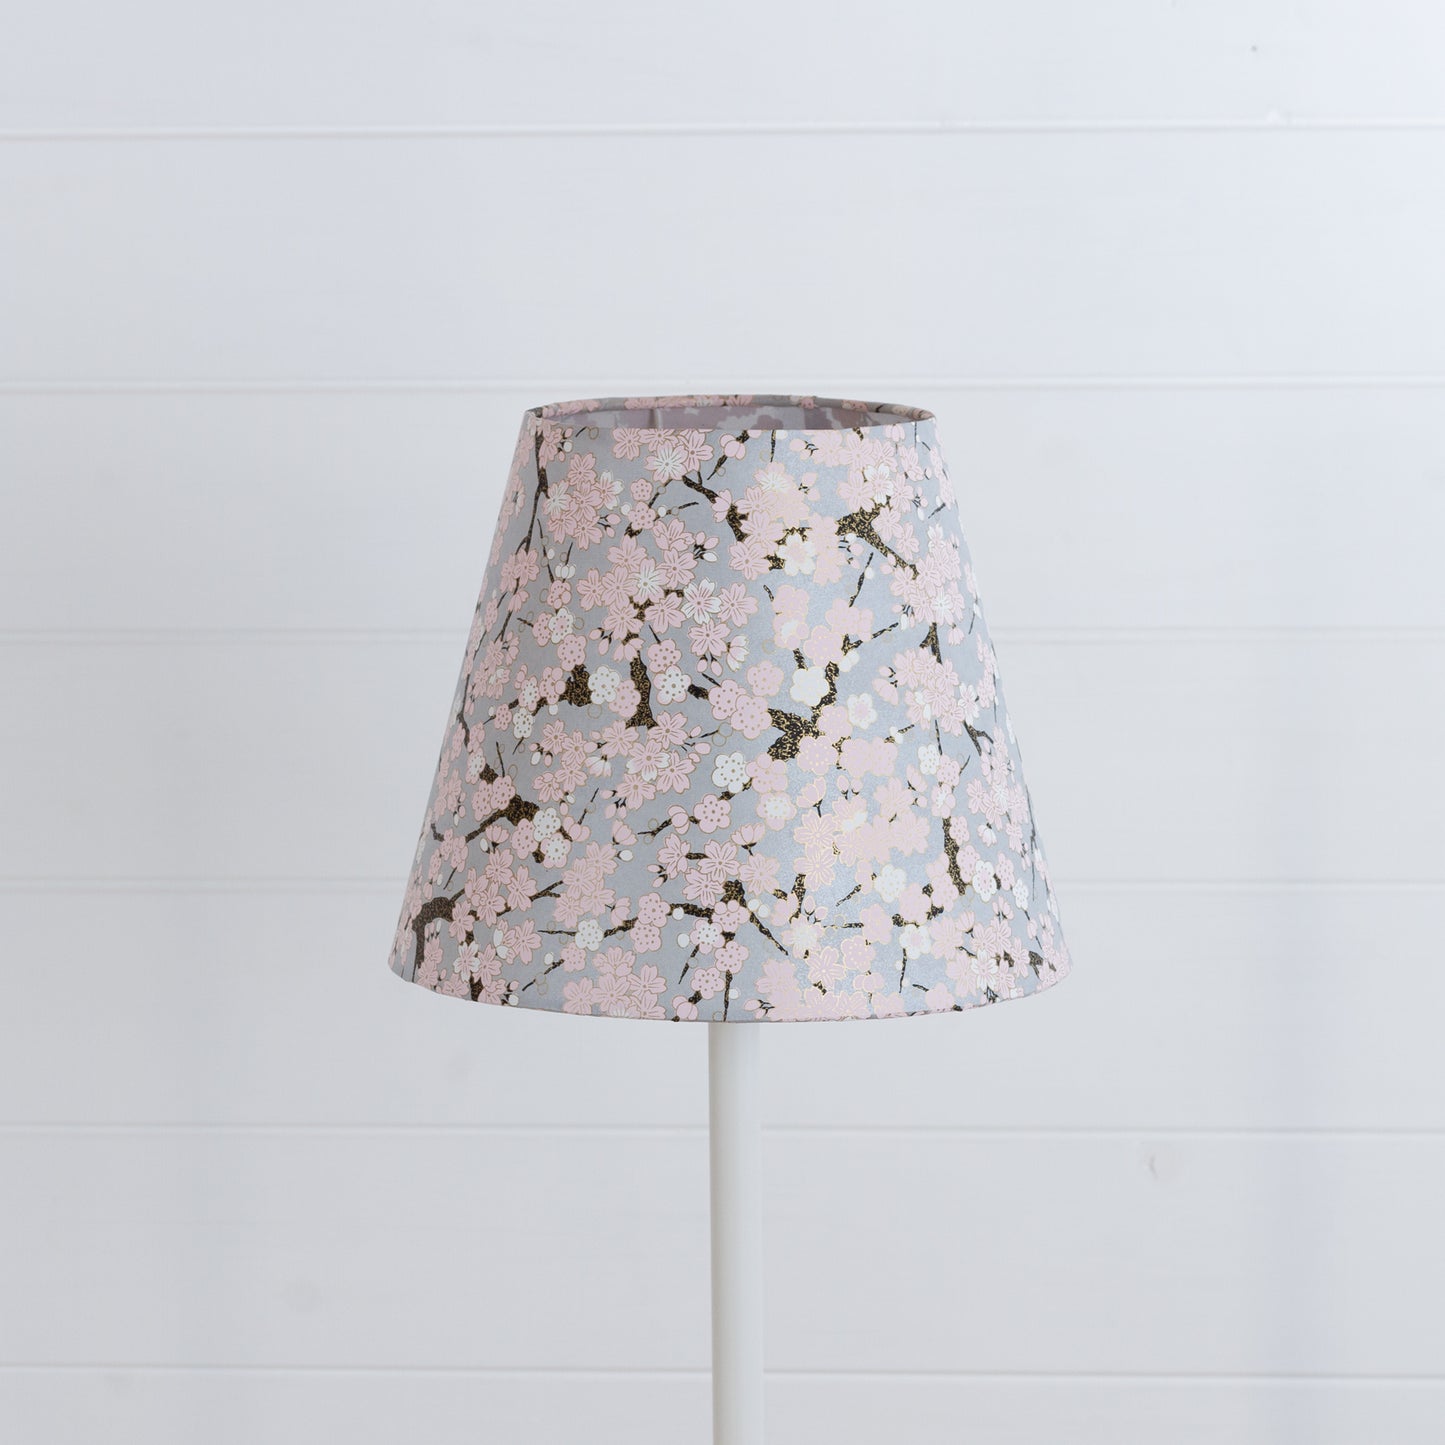 Conical Lamp Shade W02 ~ Pink Cherry Blossom on Grey, 15cm(top) x 25cm(bottom) x 20cm(height)